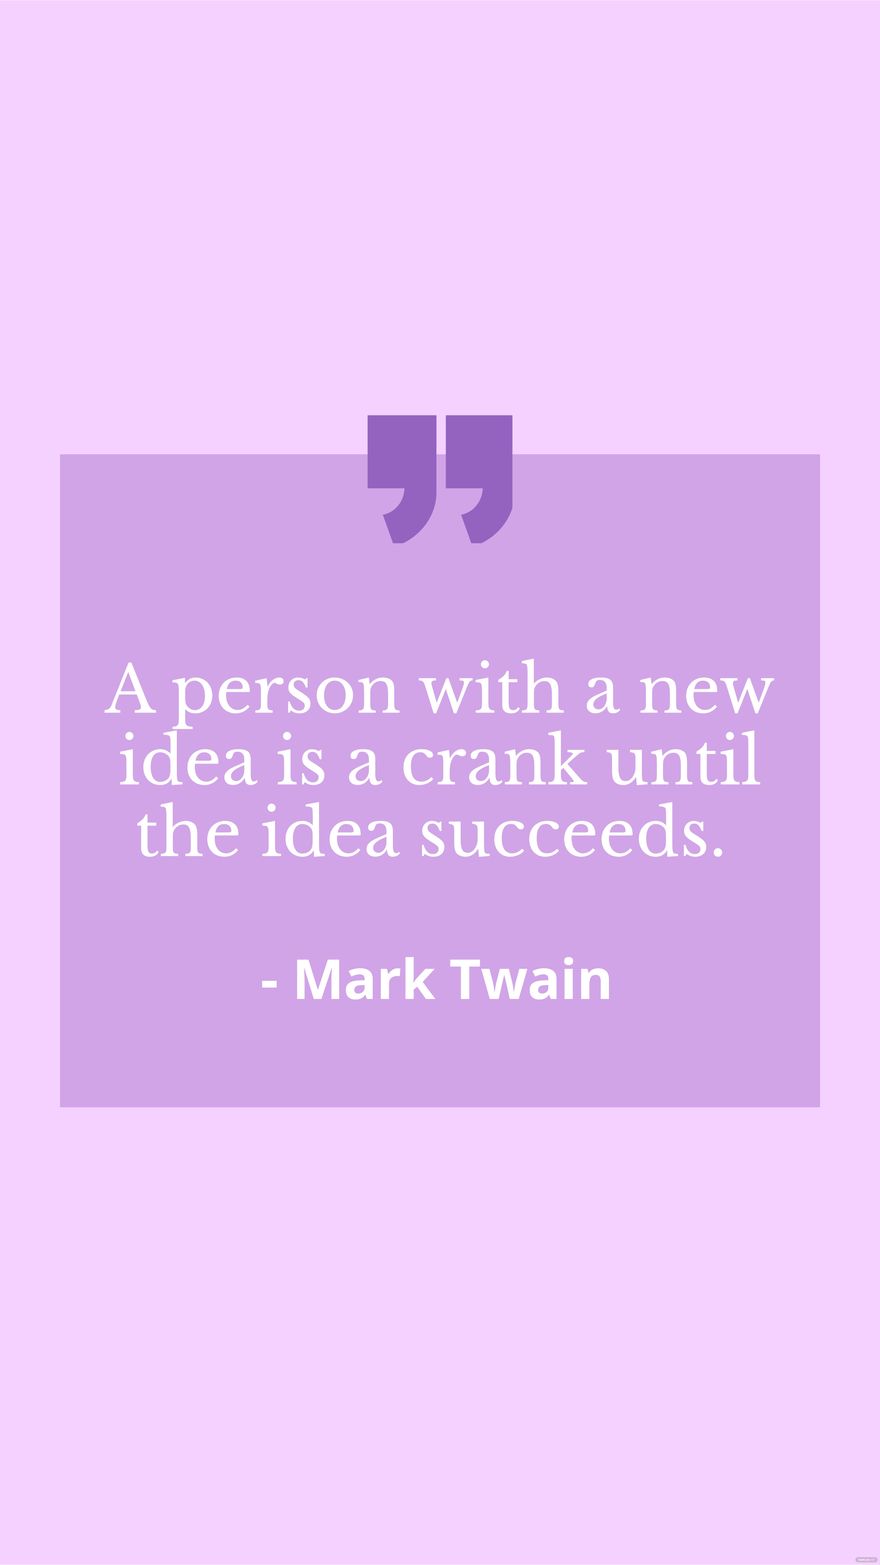 Free Mark Twain - A person with a new idea is a crank until the idea succeeds.